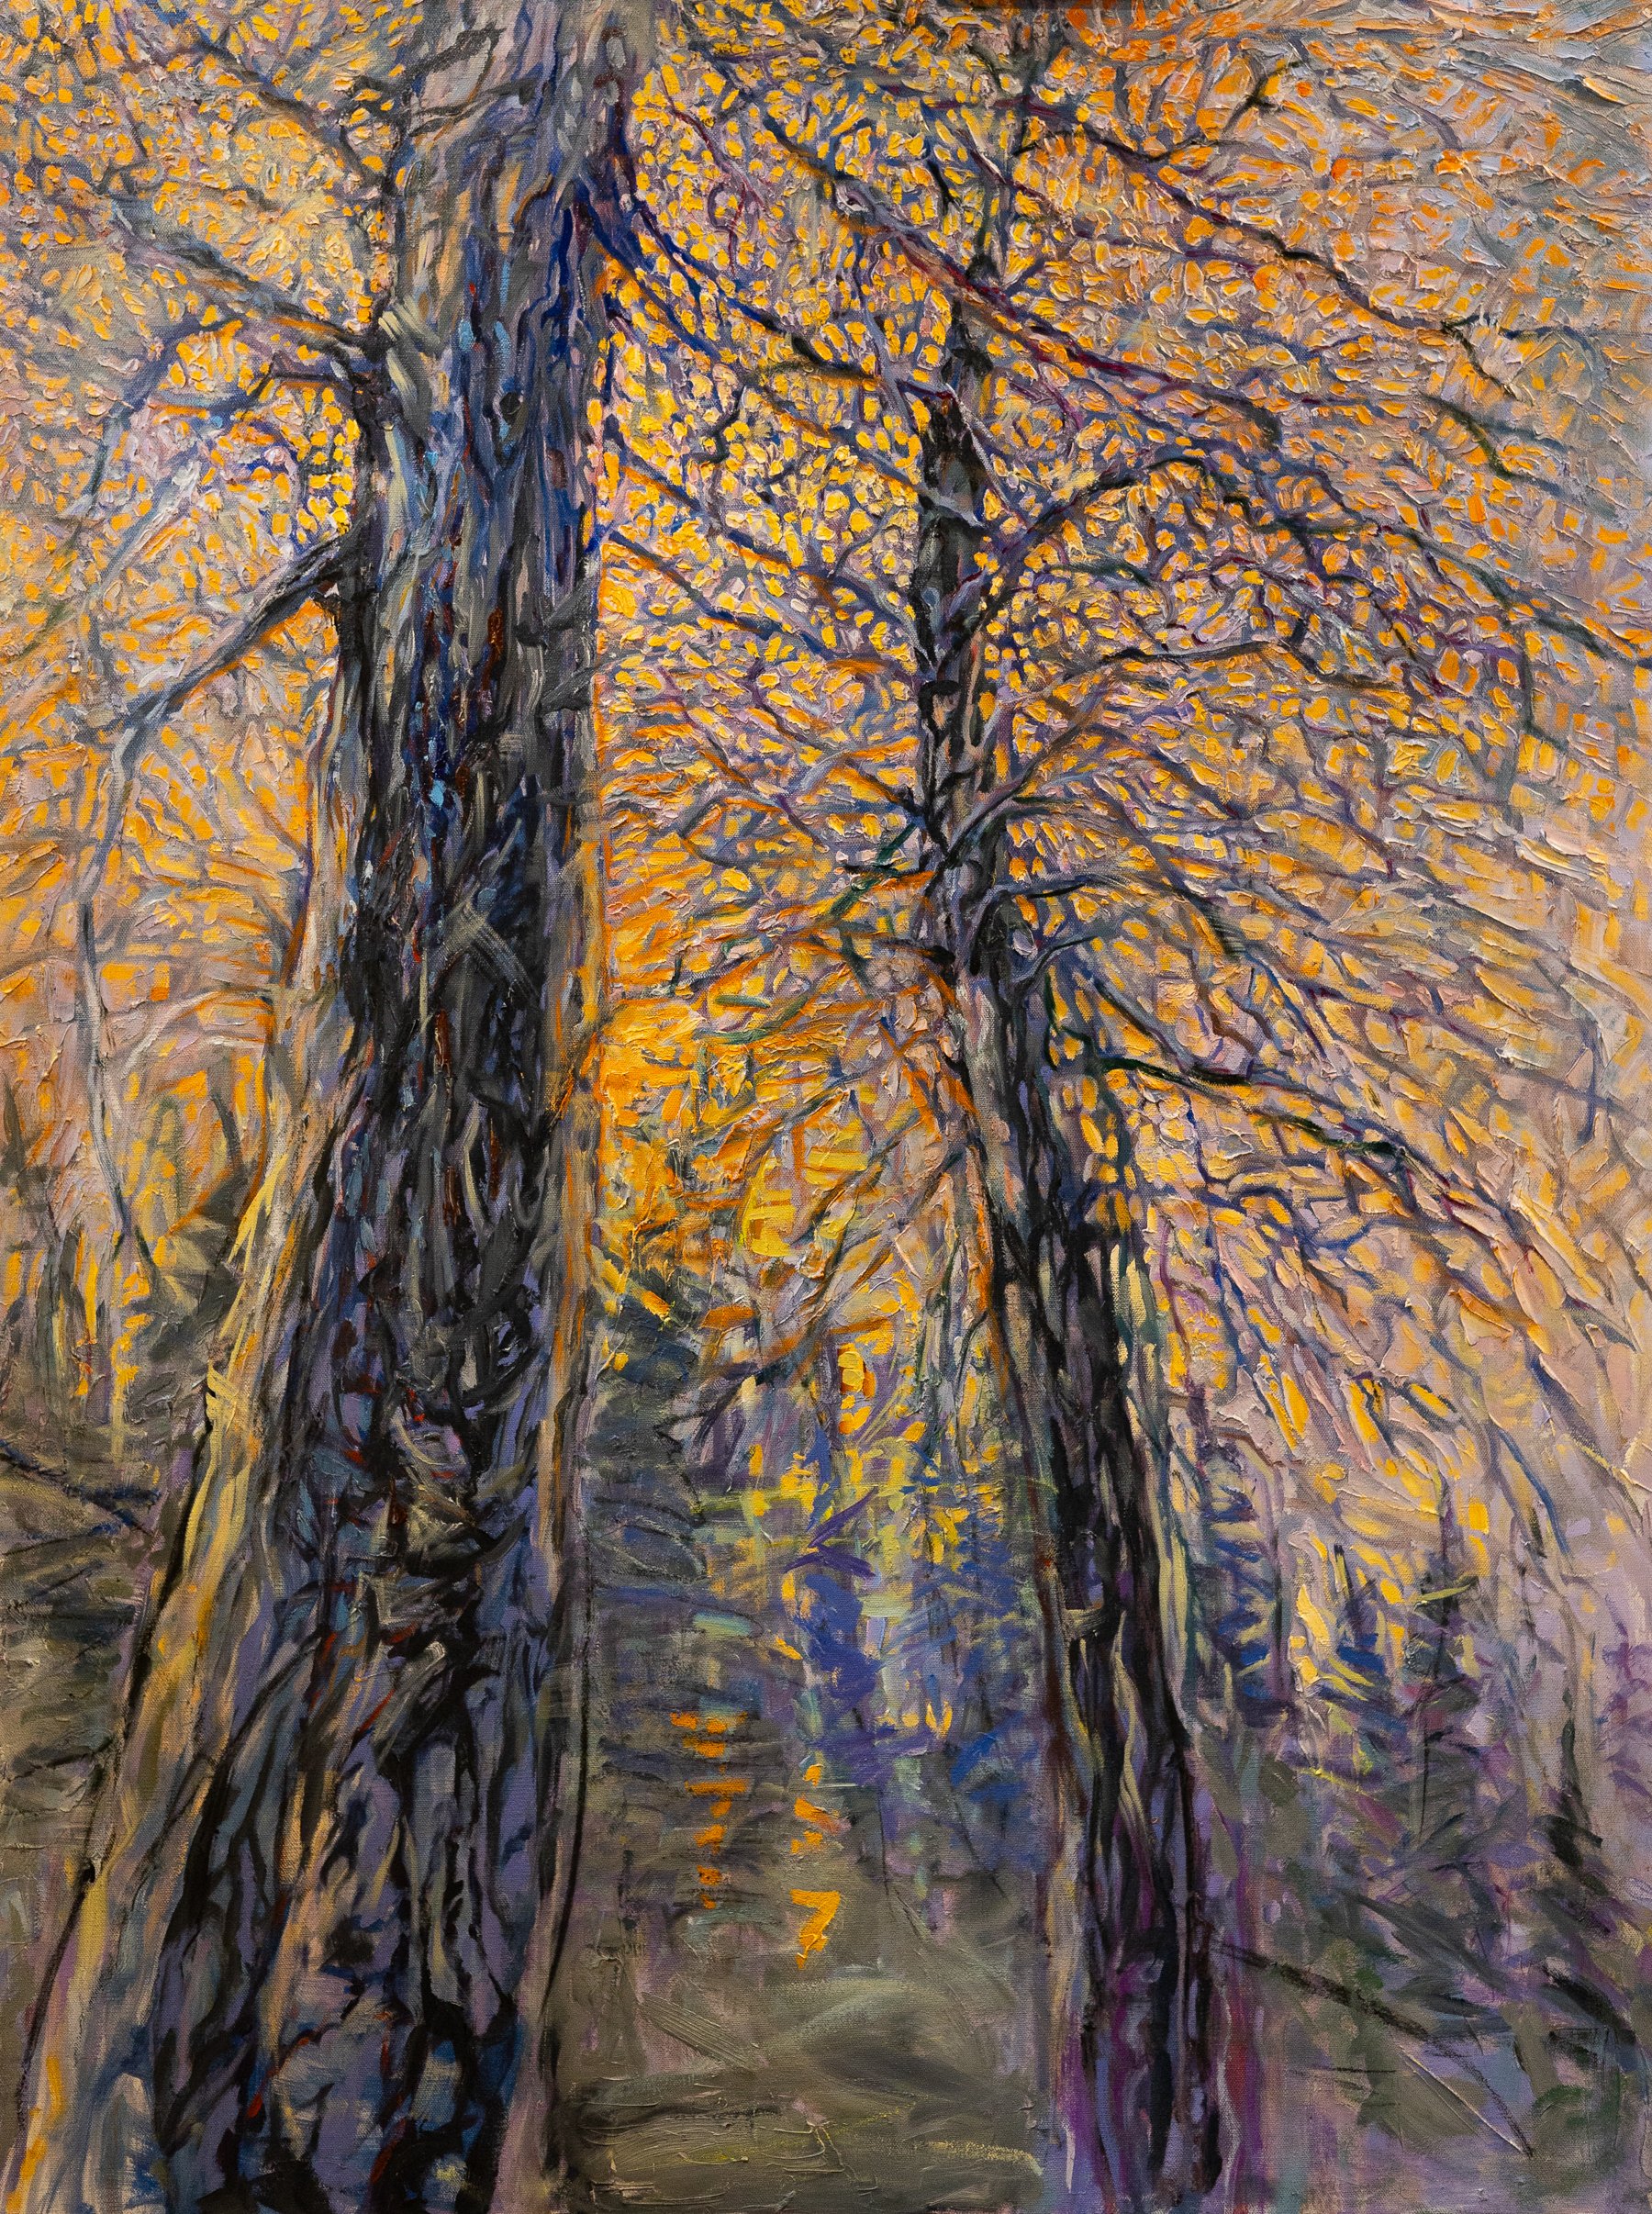   Two Trees (Strength vs. Subtlety)   Oil on canvas  48” x 36”   